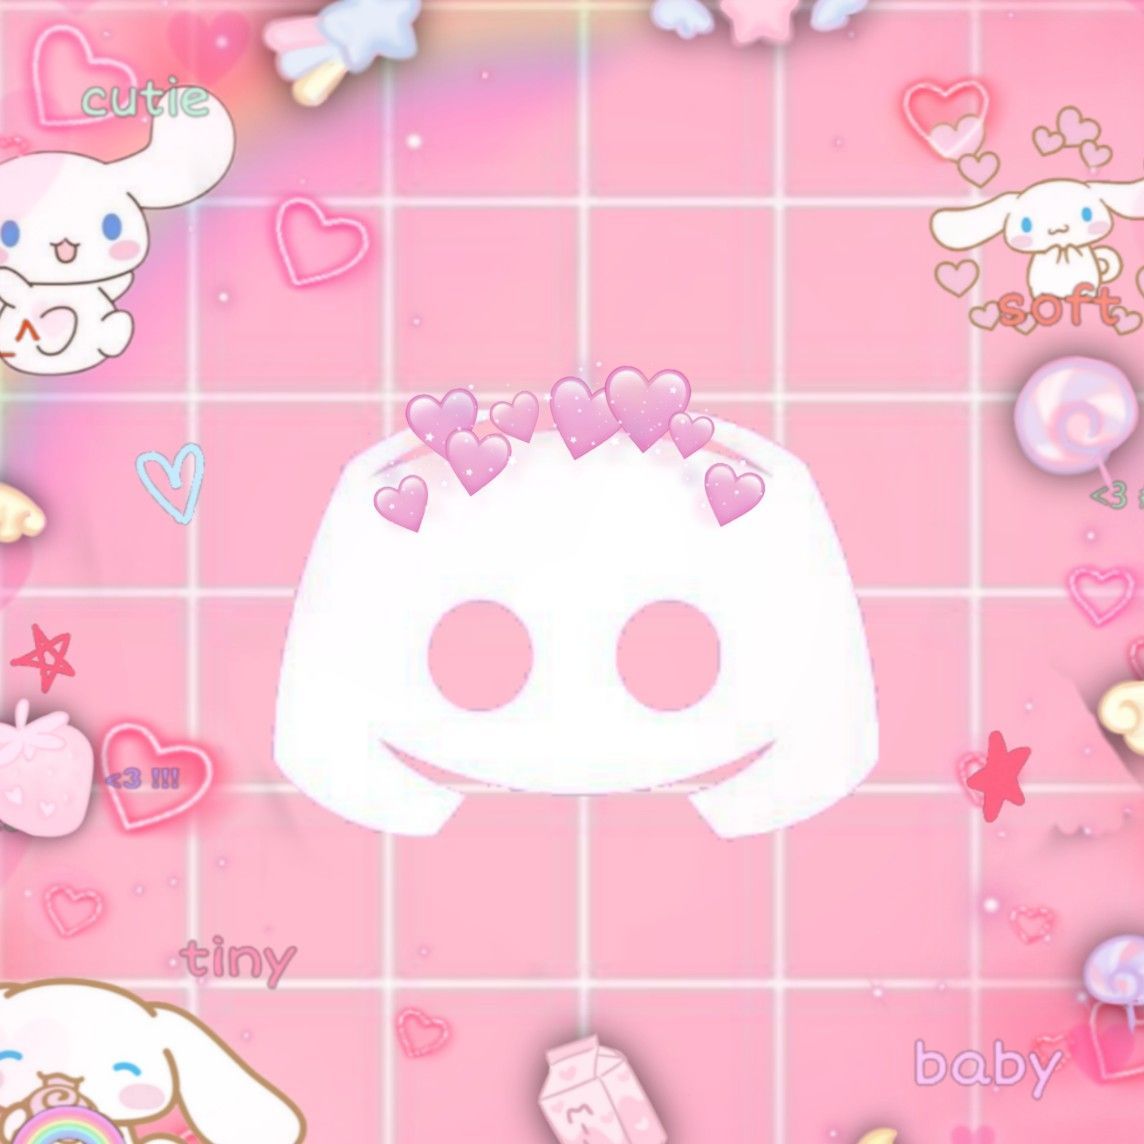 Discord Icon Pink Aesthetic.